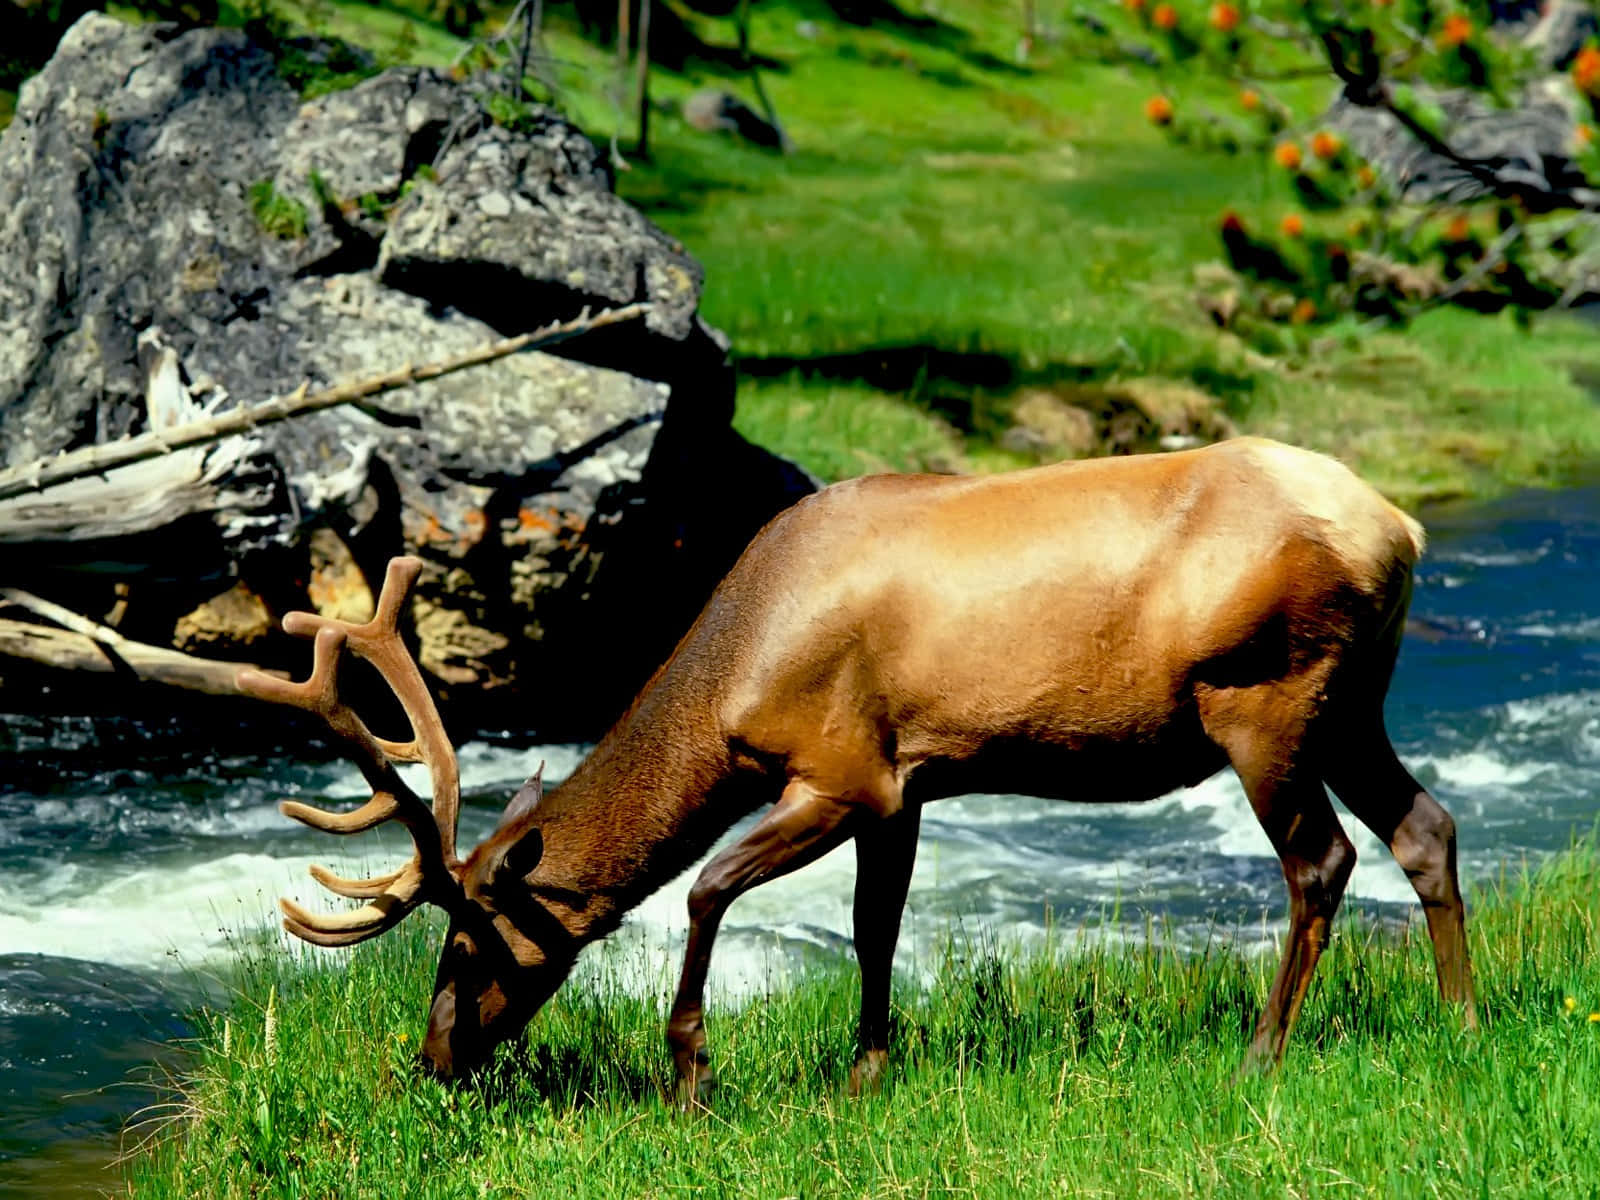 A Large Elk Grazing In The Grass Near A River